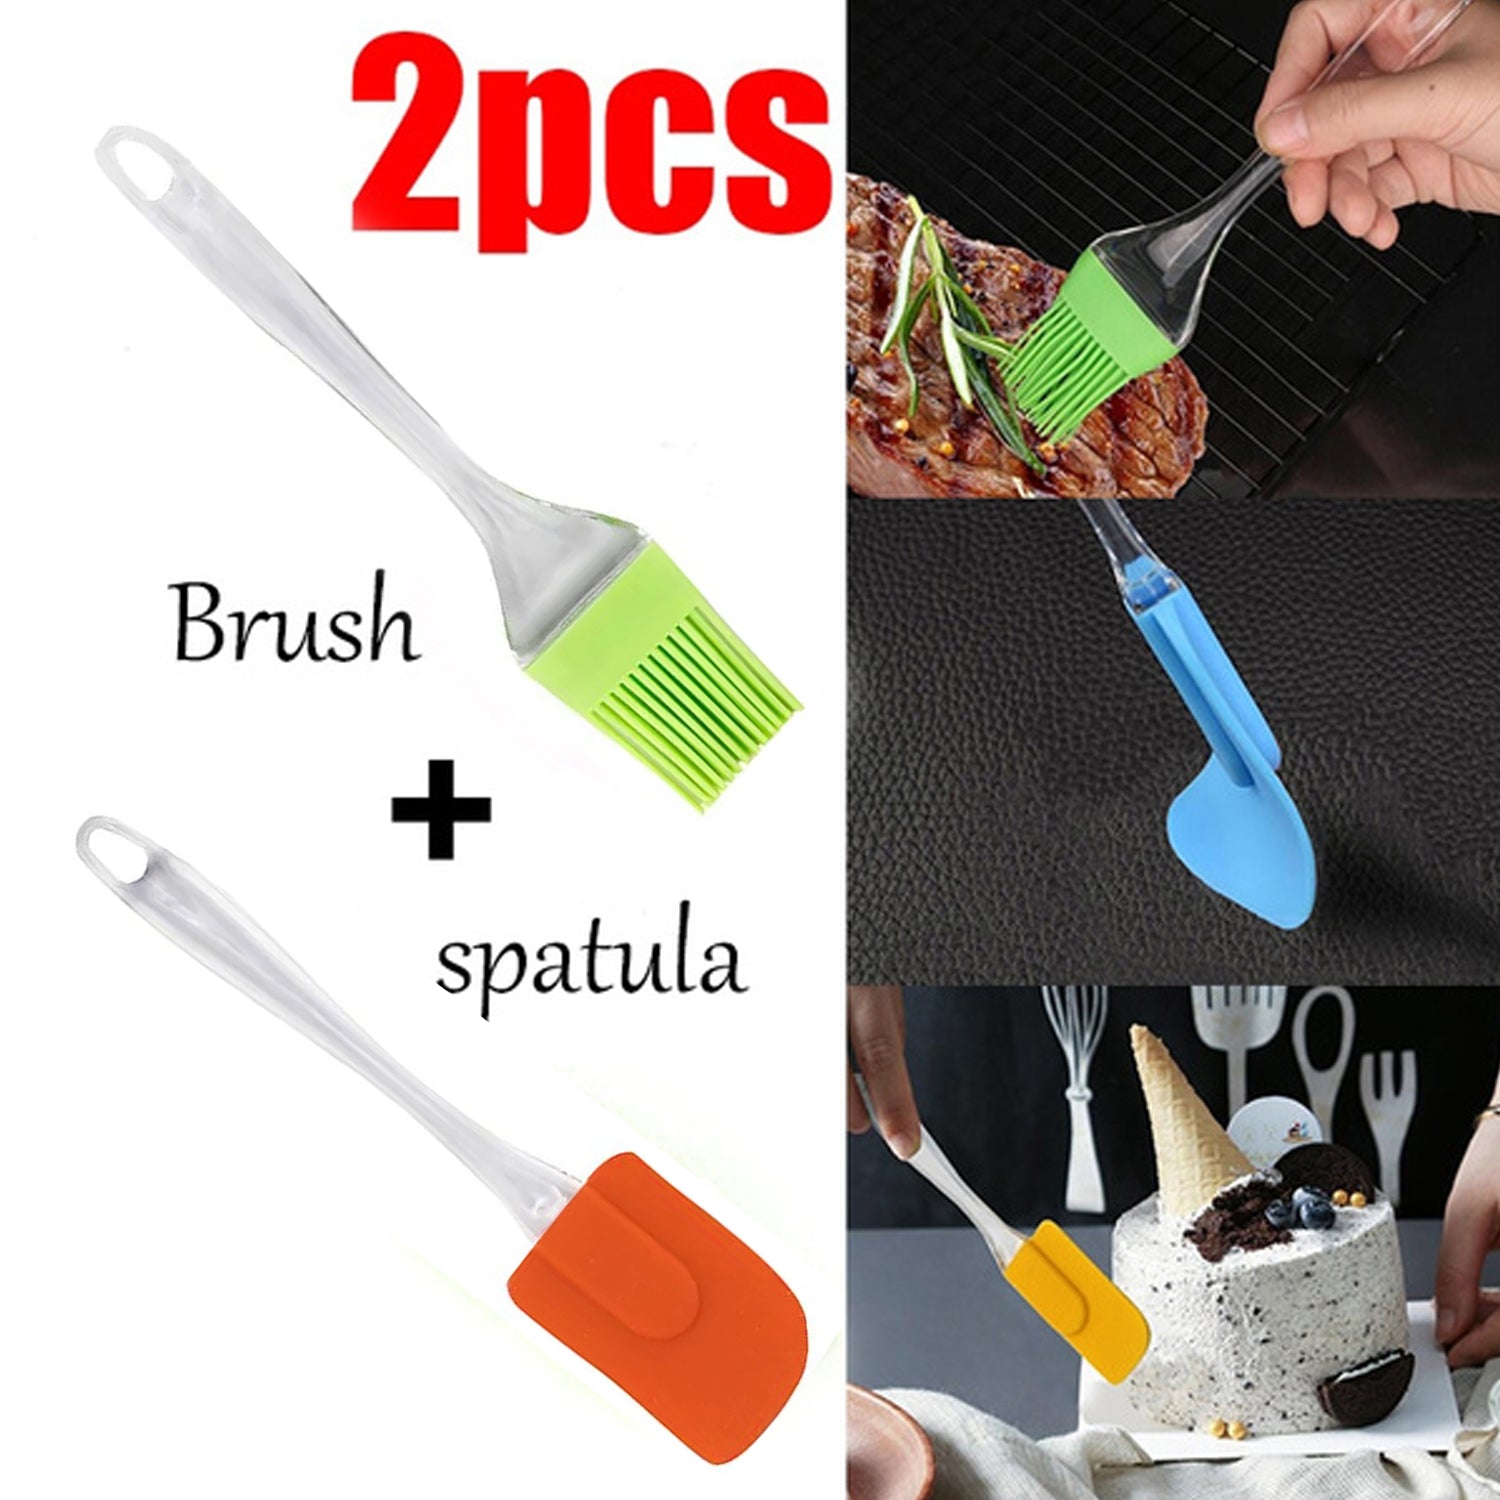 2825 2 in 1 Combo of Big Brush & Spatula Set for Pastry, Cake Mixer, Decorating, Cooking, Baking, Grilling Tandoor | Bakeware Combo | Kitchen Tool Set 